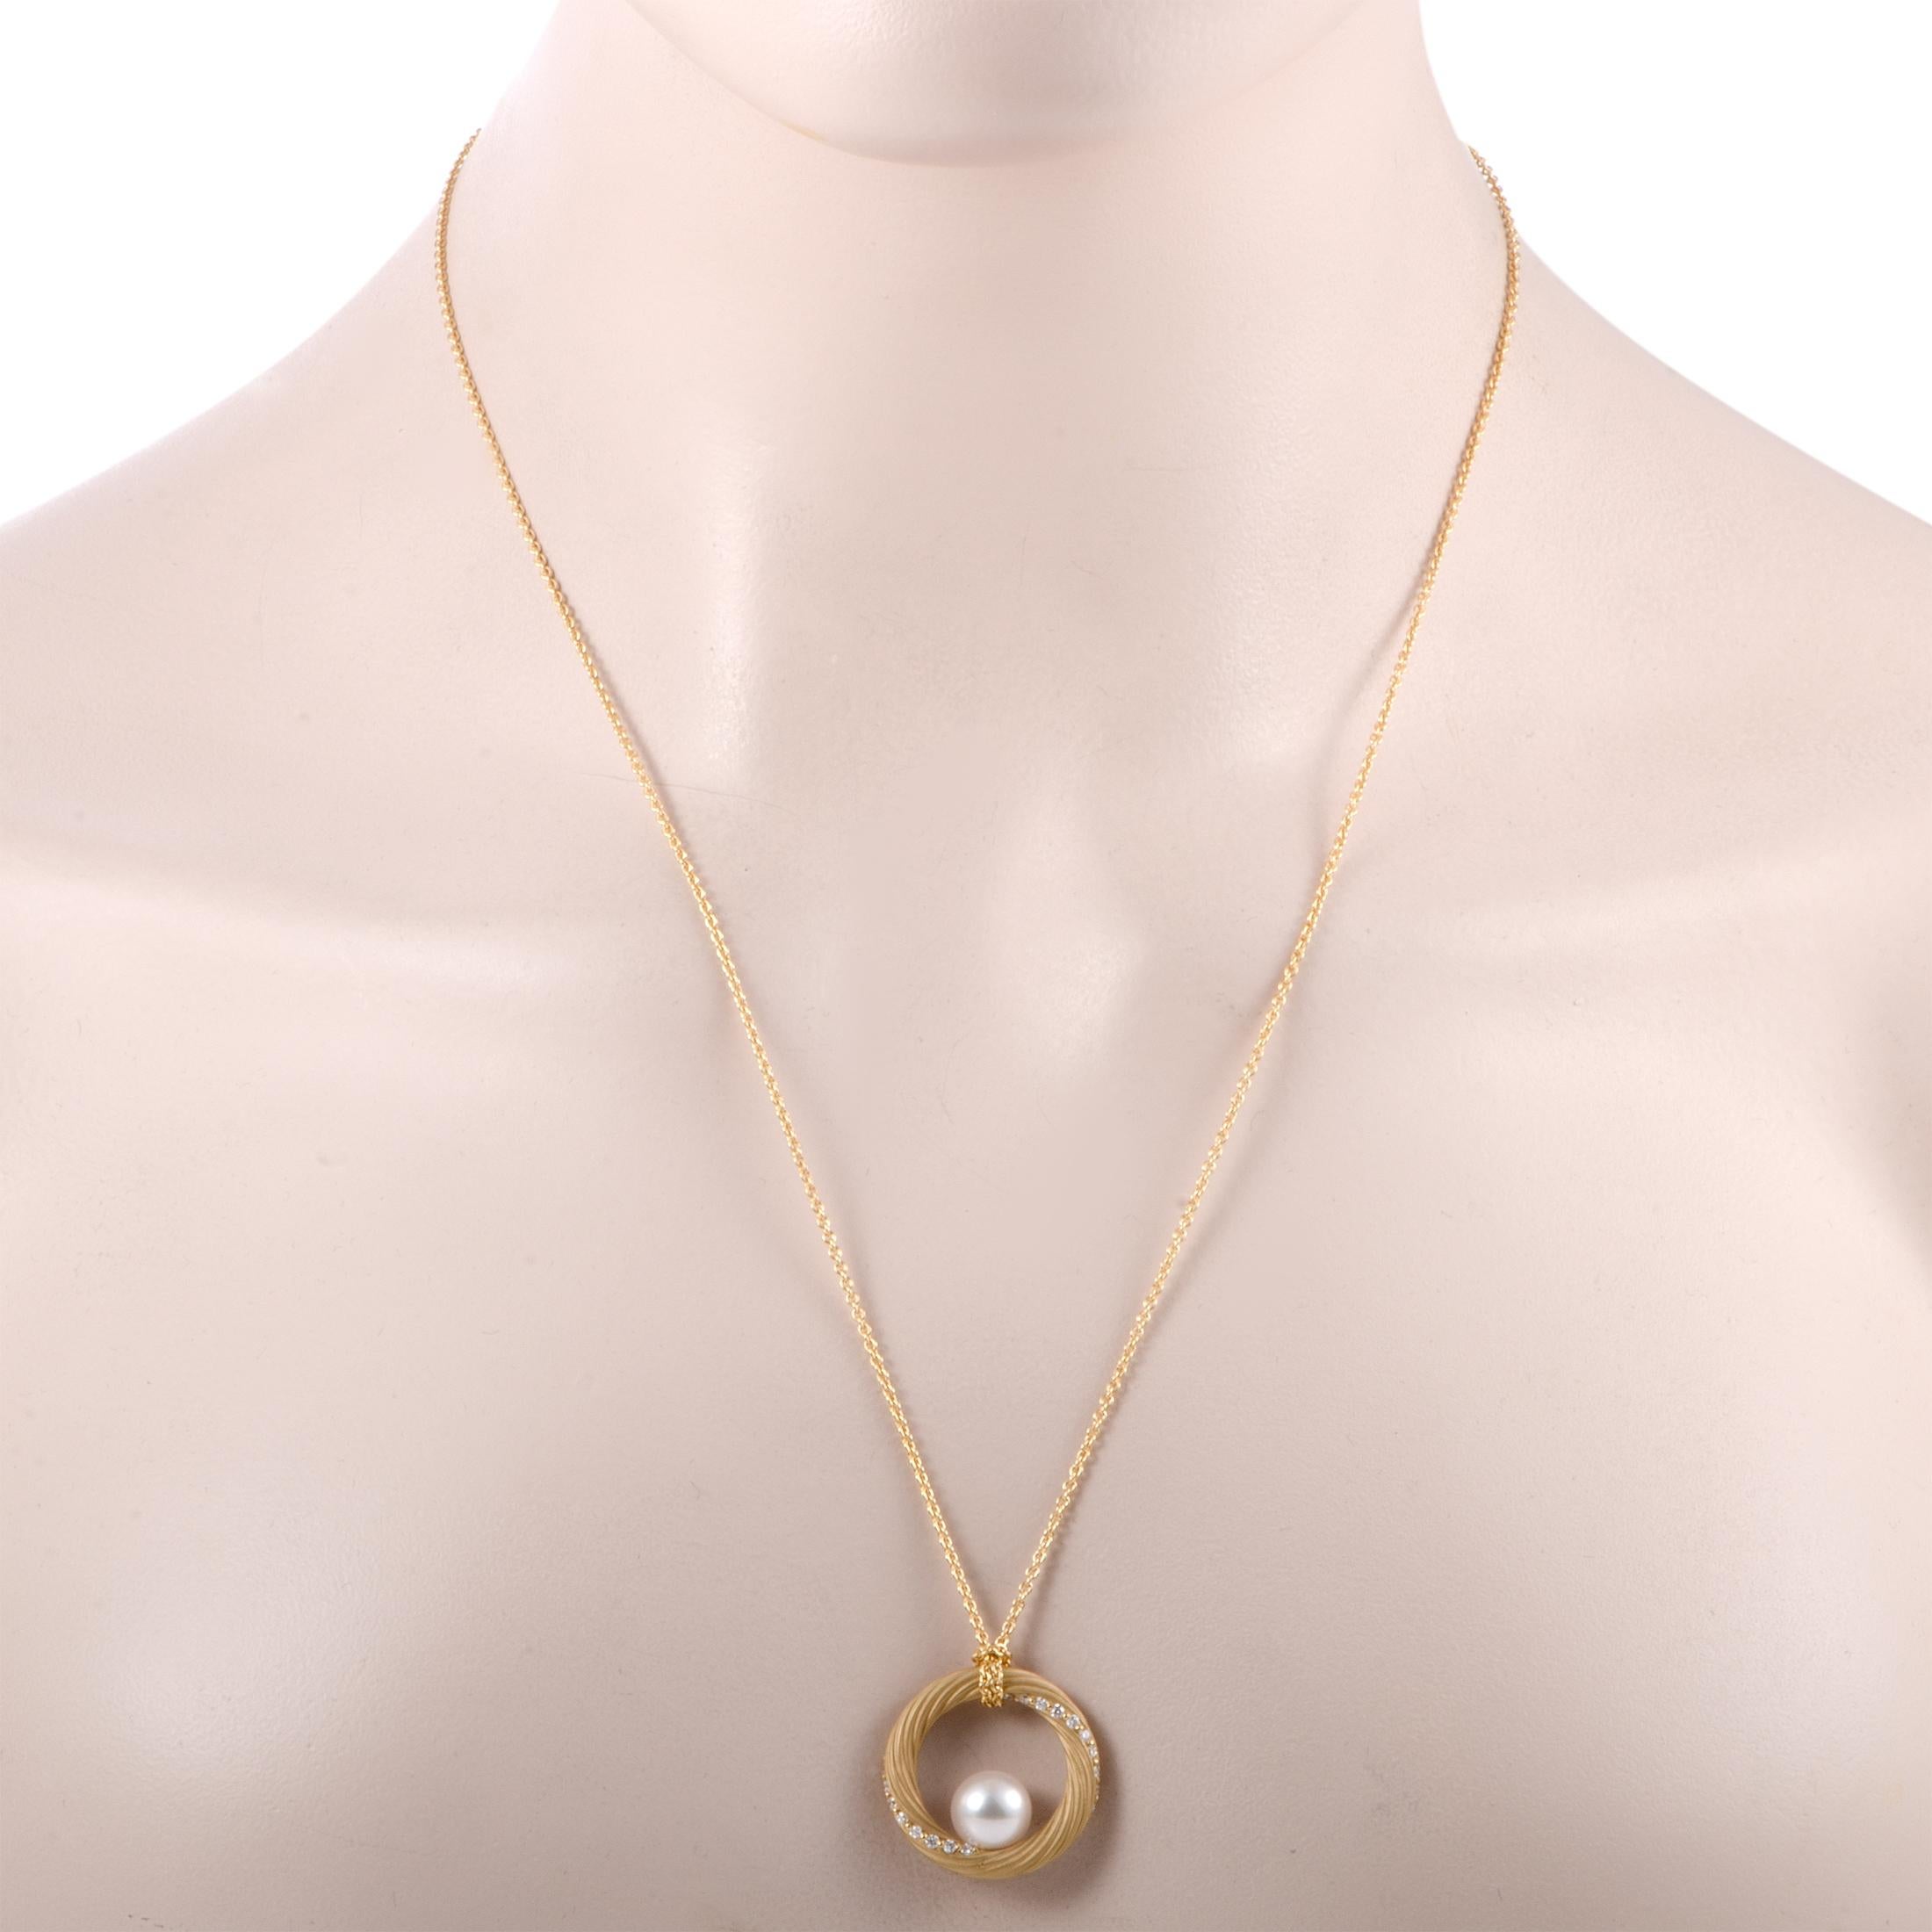 This glamorous 18K yellow gold necklace by Mikimoto exhibits a sensationally alluring style and an extravagantly feminine appeal. Its gorgeous pendant features 0.40ct of dazzling diamonds and magnificent Akoya pearls of 9-9.5 mm that accentuate the